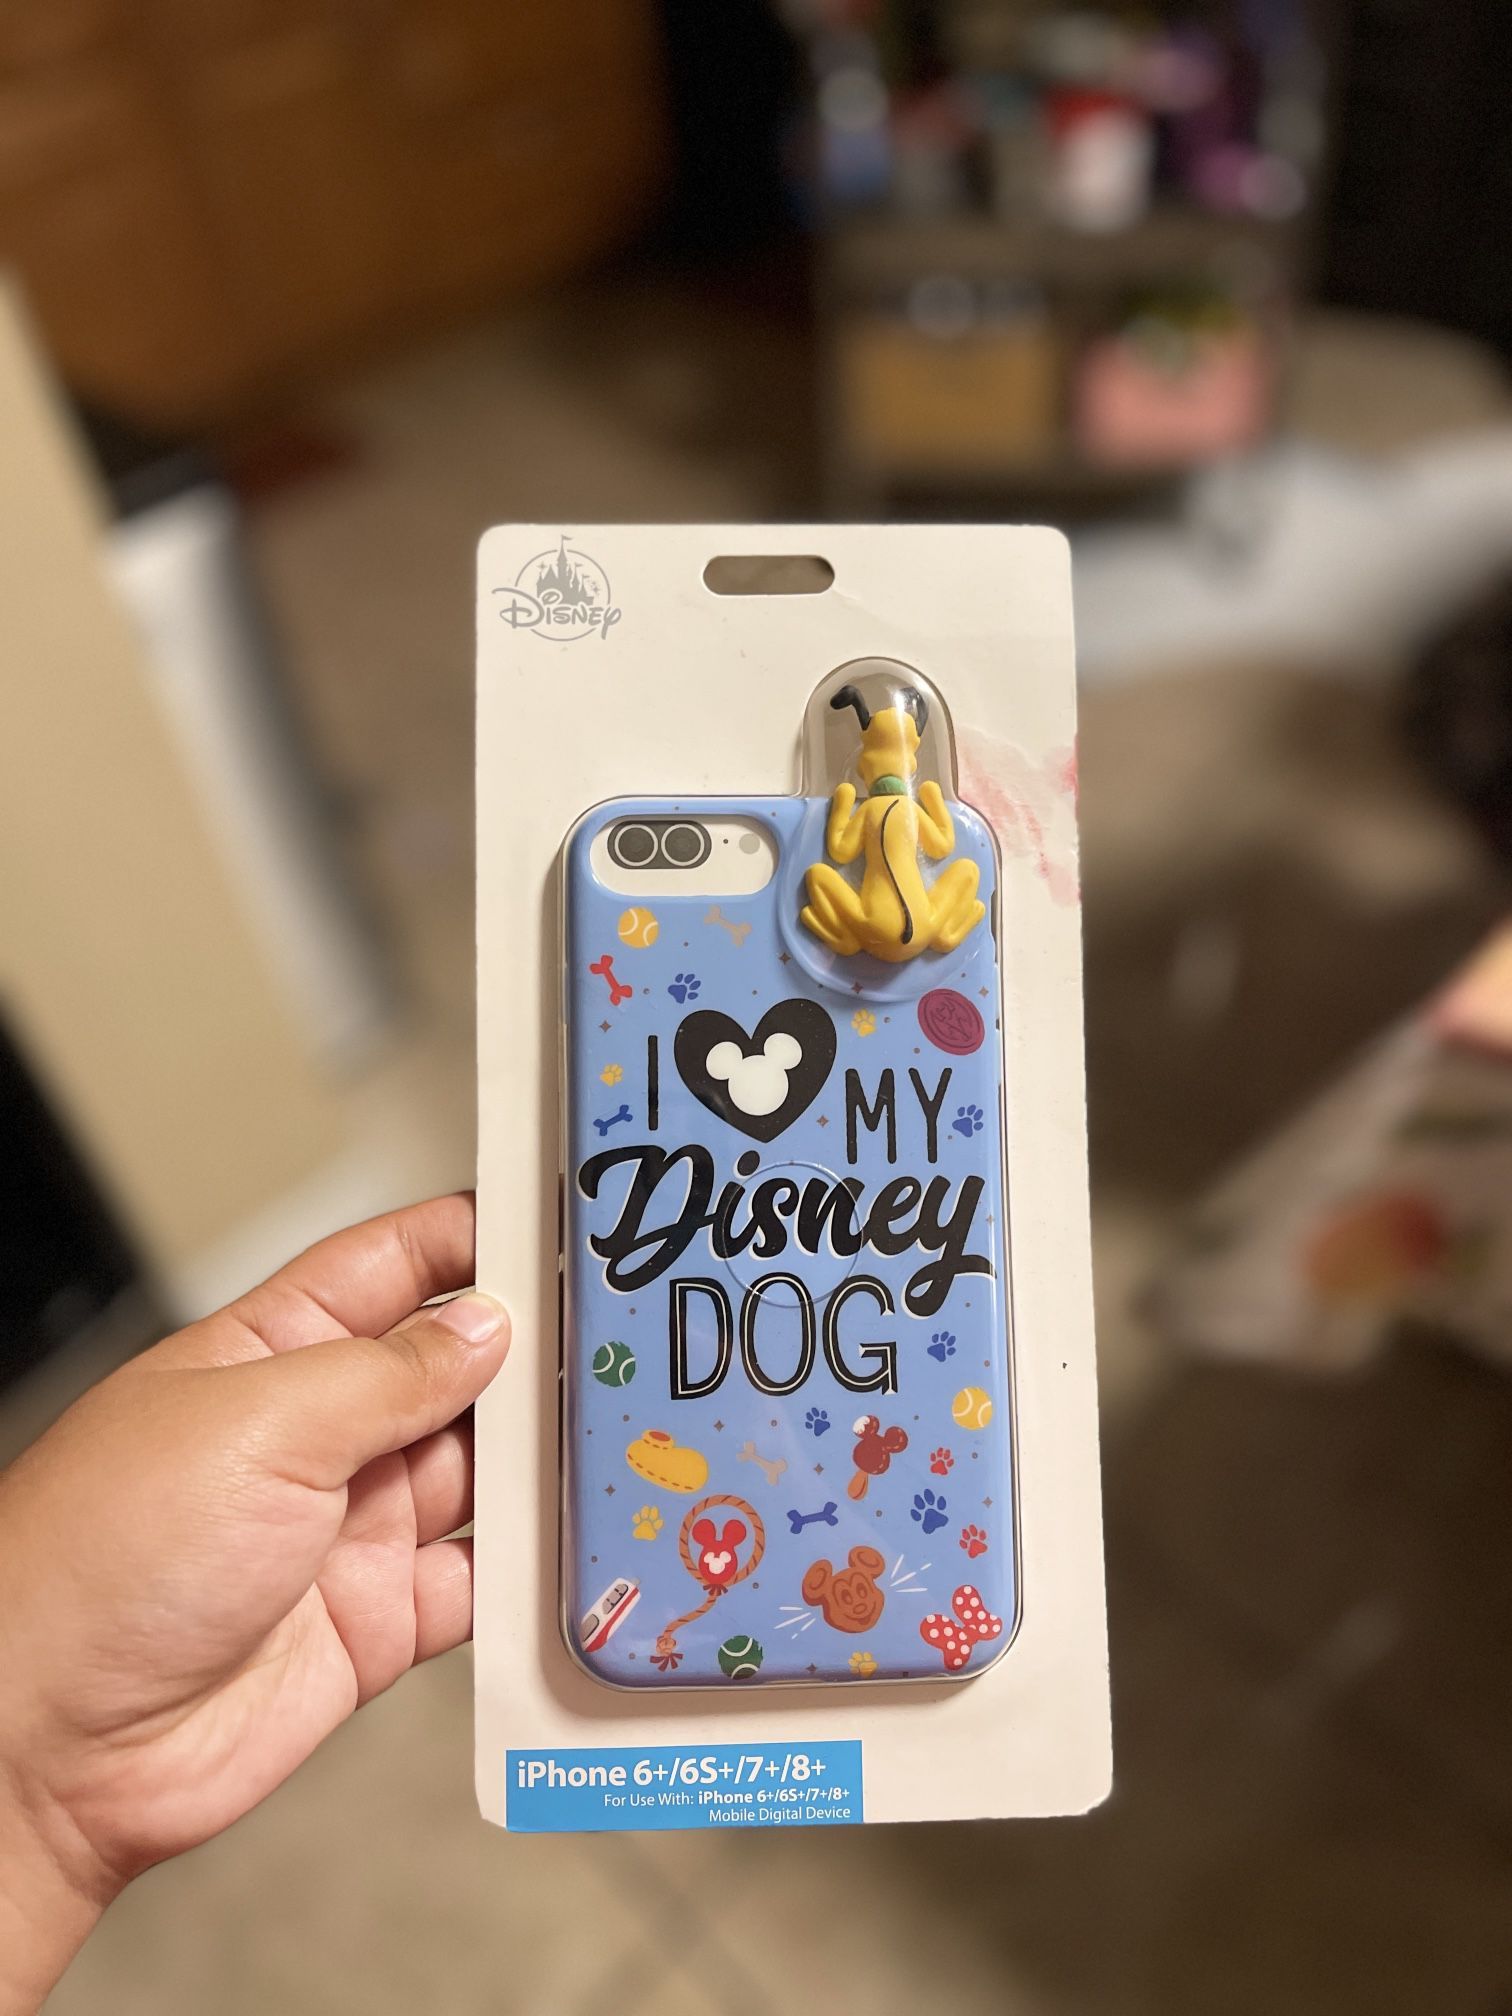 Disney Themed iPhone Case For 6+/6S+/7+/8+